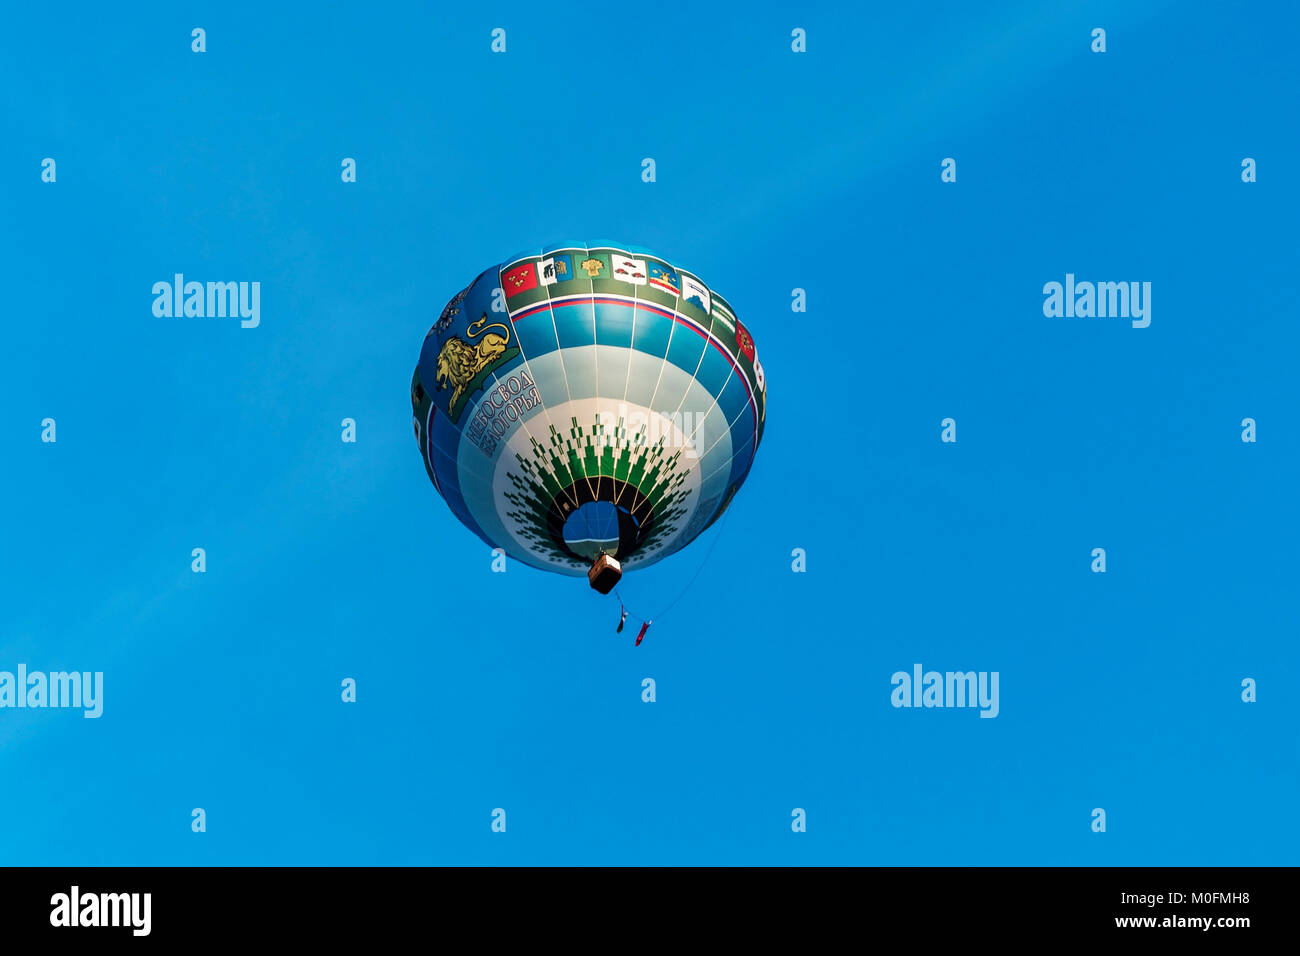 Belarus, Minsk - 2017.09.17: balloon says 'Sky mountains' in the background of blue sky at the festival of Aeronautics (bottom view) Stock Photo